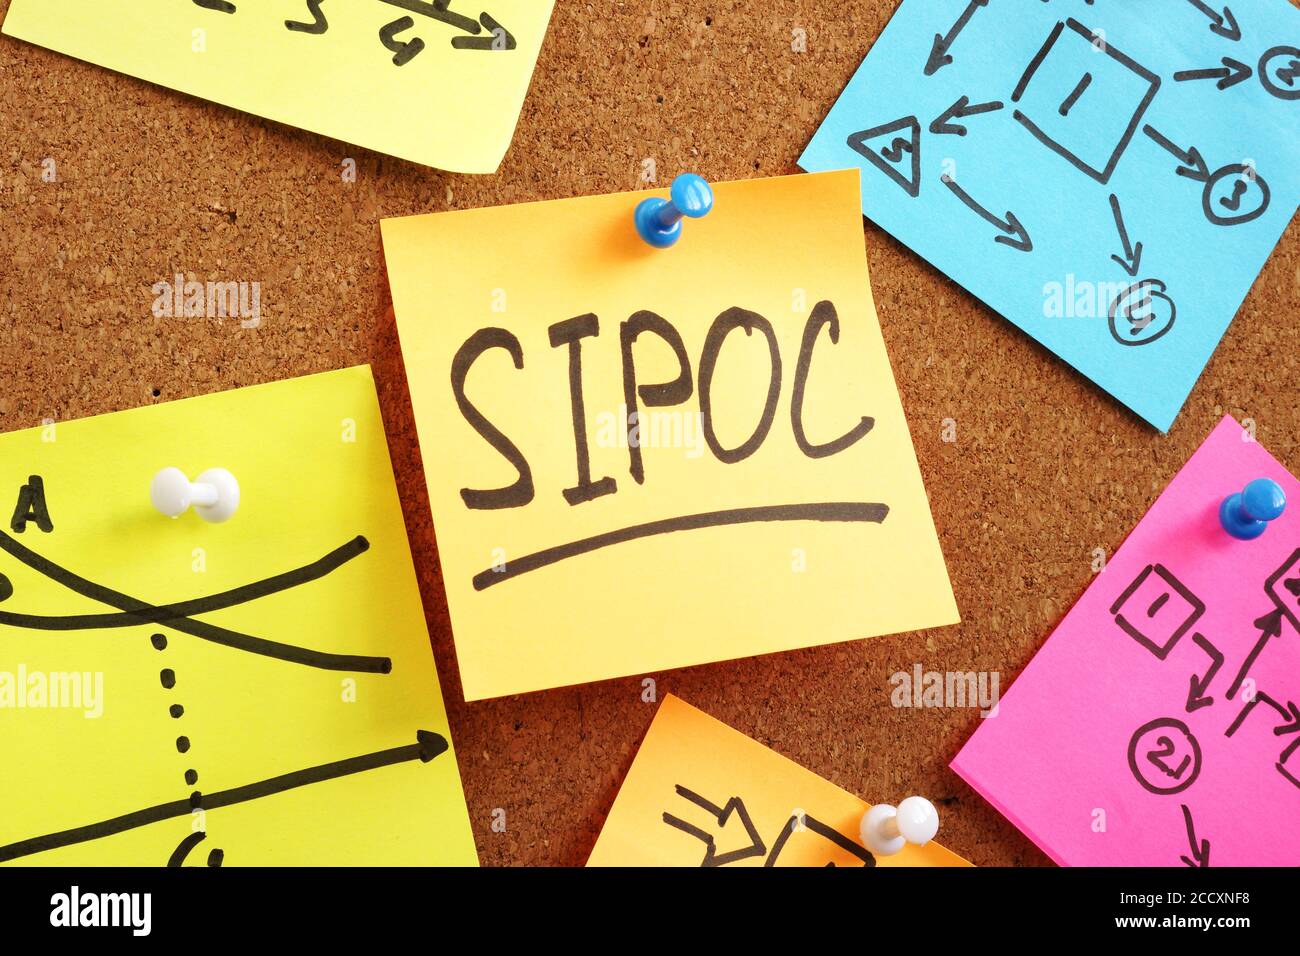 SIPOC acronym supplier input, process output, customer on the memo. Stock Photo